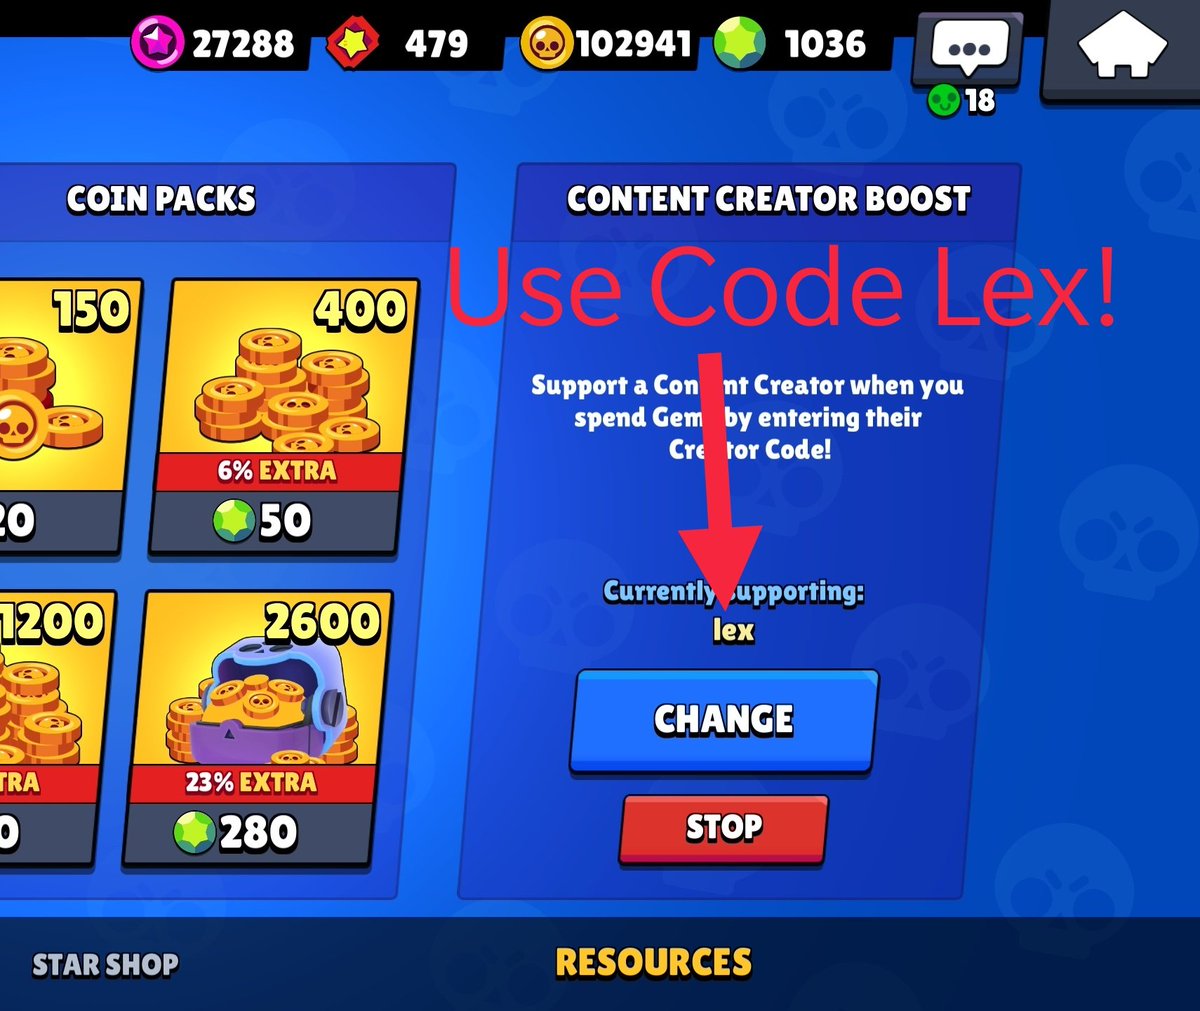 Lex On Twitter Use Code Lex Creator Codes Back In Brawlstars Just Scroll To The Right In The Shop Enter Lex And You Re Garunteed Free Legendary Brawlers So That Last Part Isn T - brawl stars content creator code